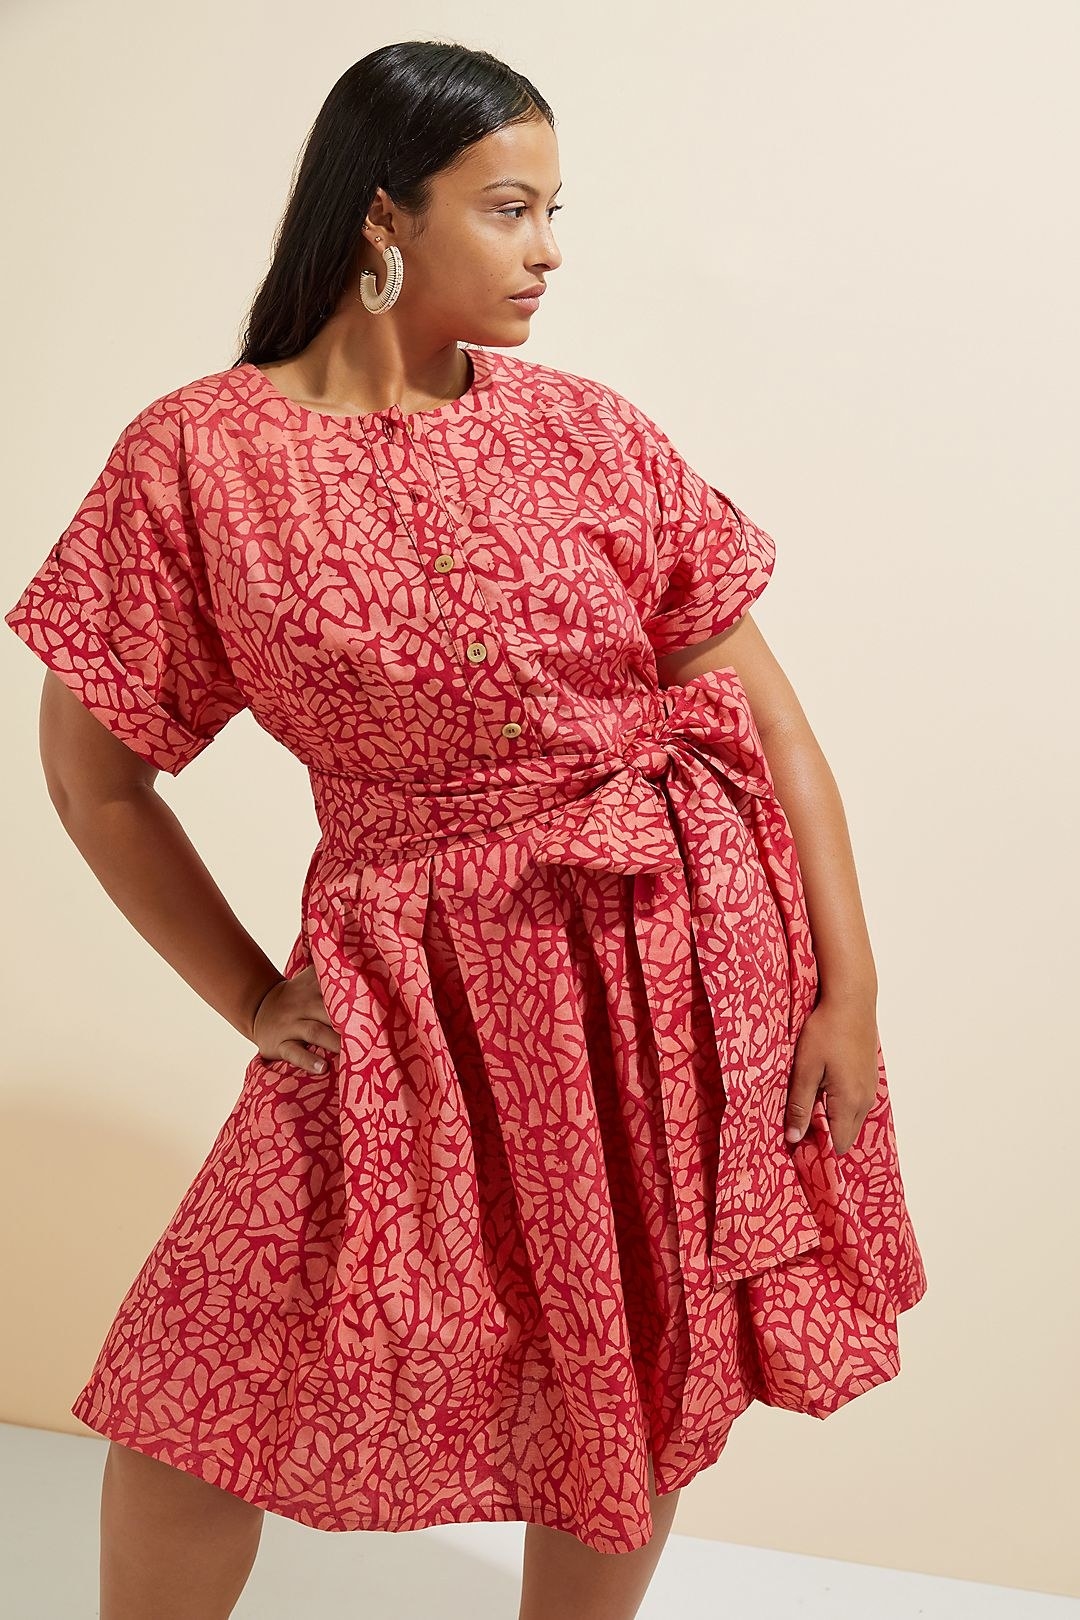 model wearing the pink patterned dress with a large skirt